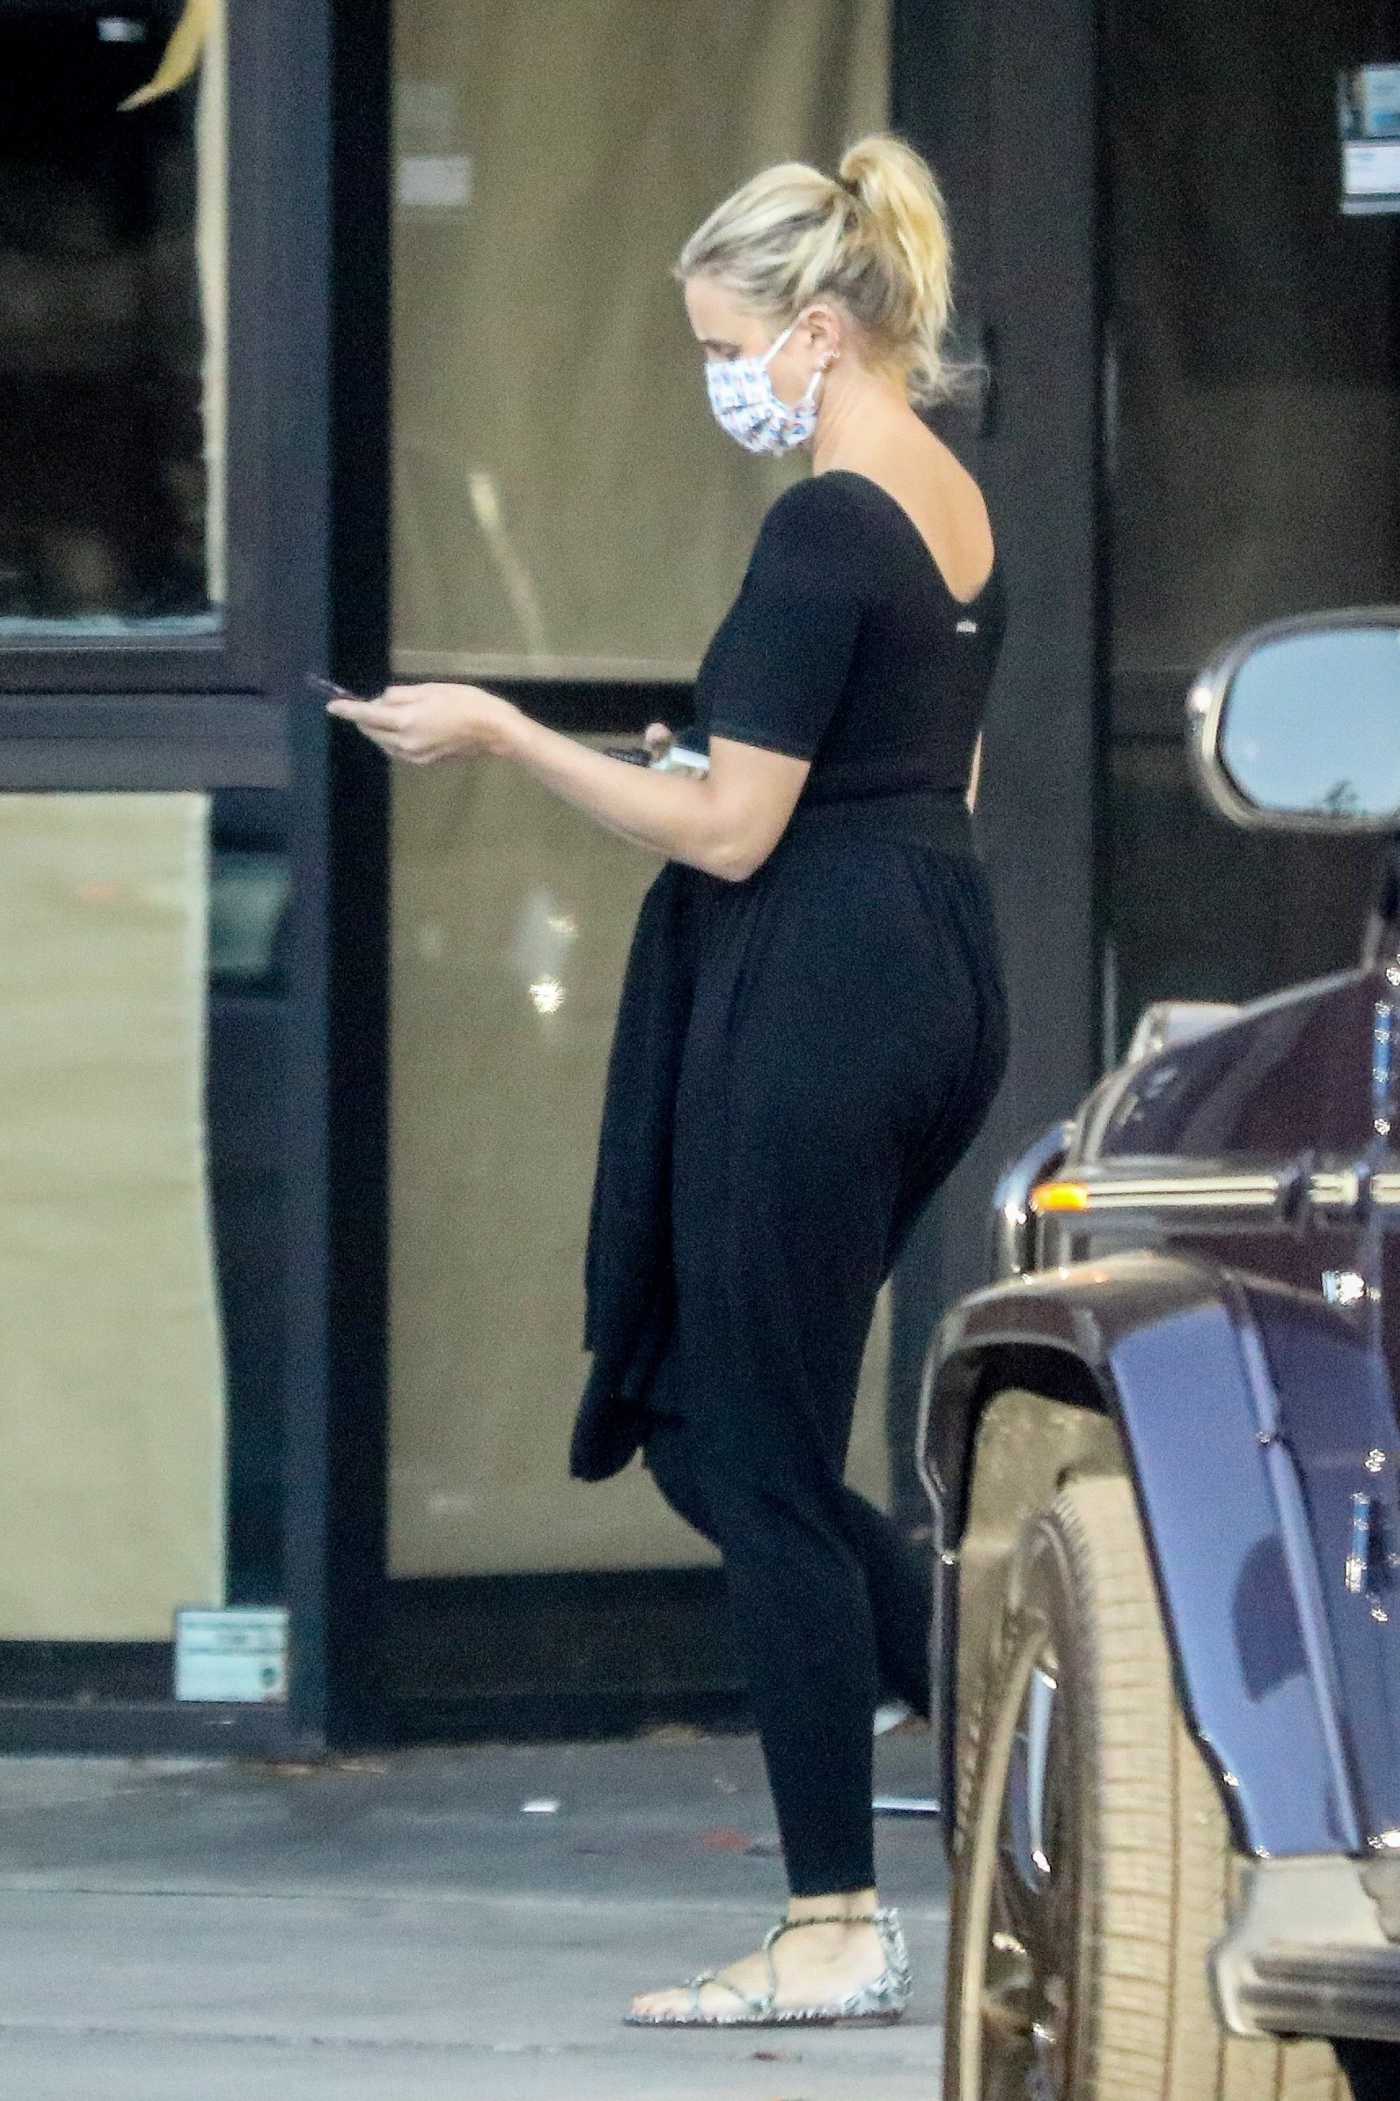 Cameron Diaz in a Black Workout Ensemble Leaves Her Physical Therapist in Beverly Hills 09/24/2020